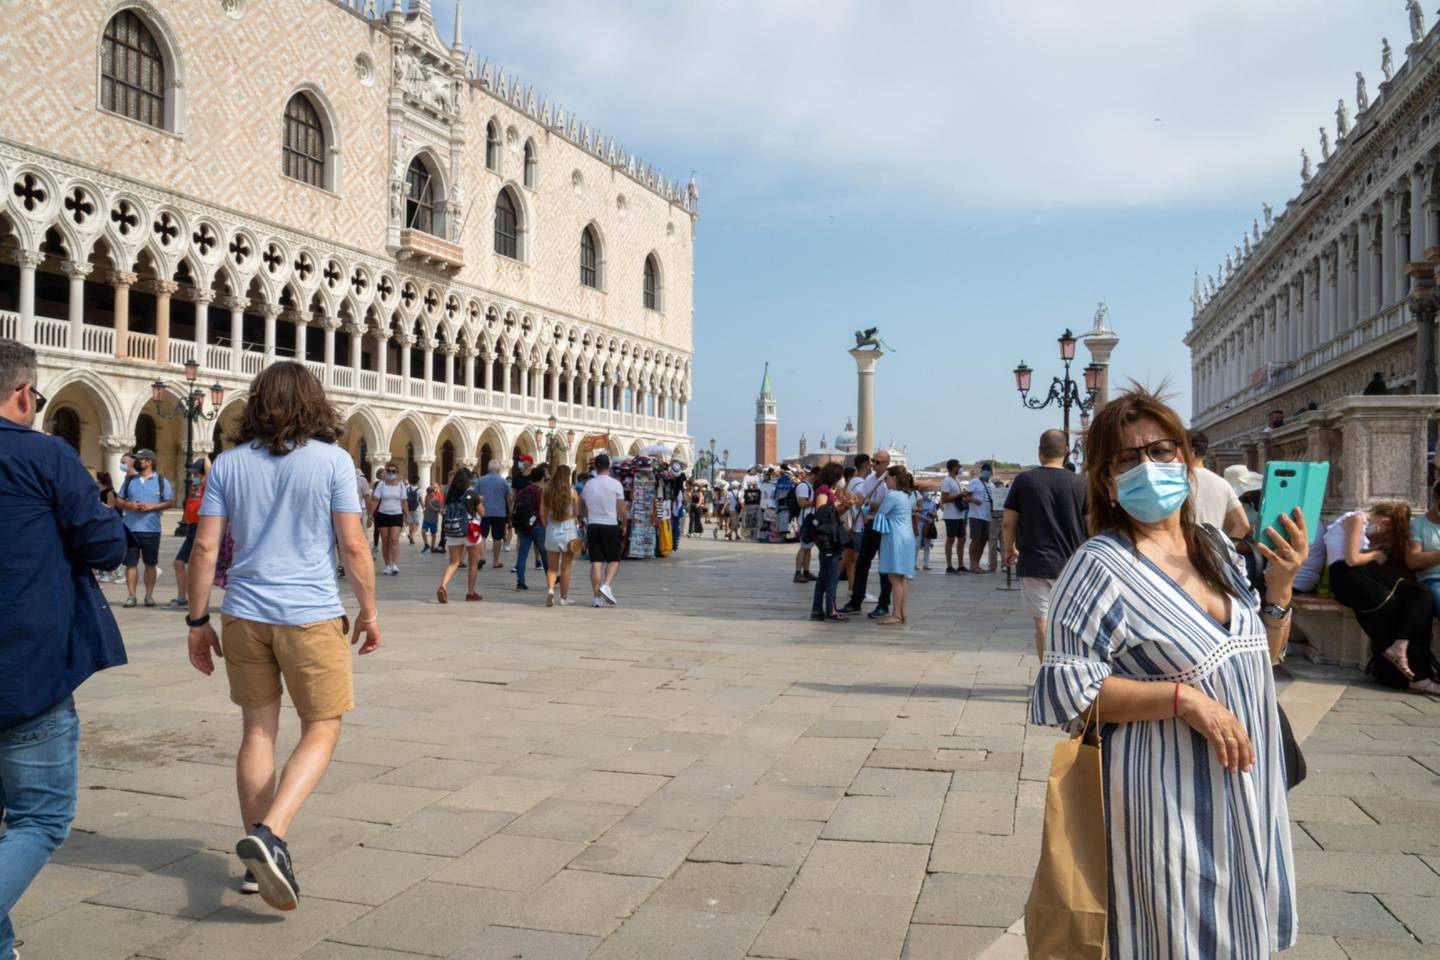 The director of the nonprofit Save Venice said residents would rather keep visitors near the iconic Piazza San Marco (above) so resident can enjoy the rest of the city. Photographer: Giulia Marchi/Bloombergdfd